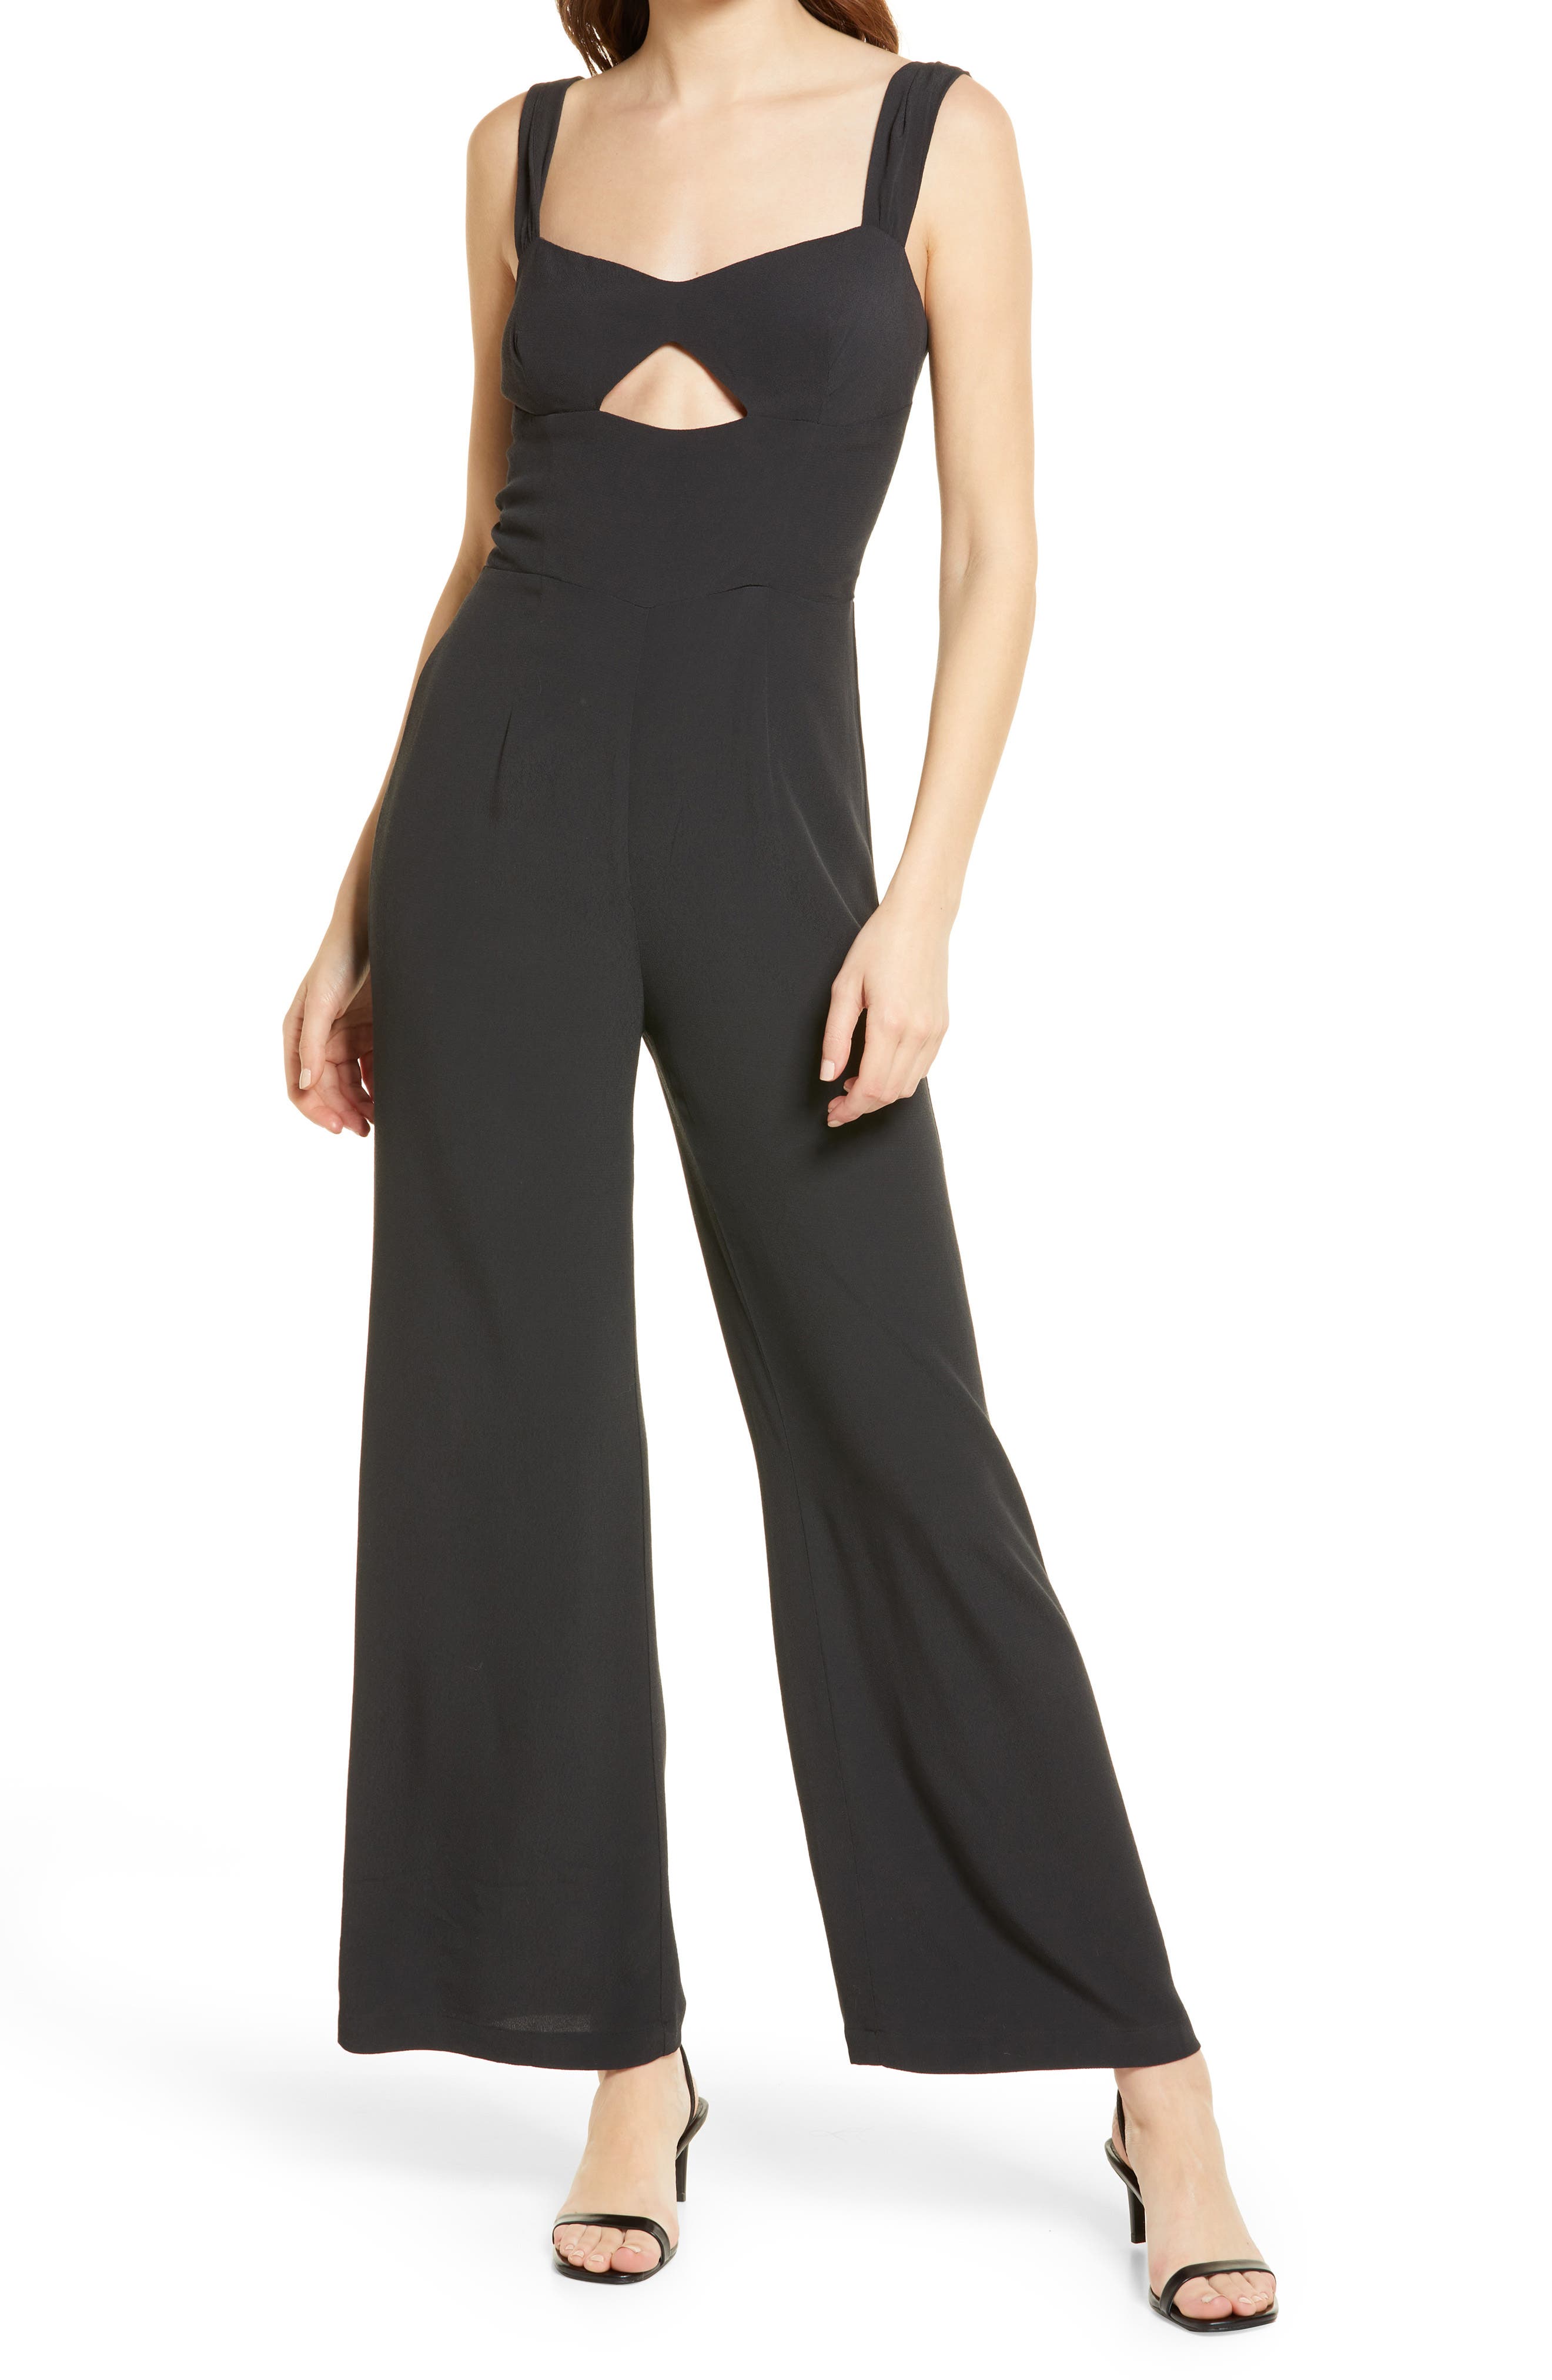 Reformation Poppy Jumpsuit in Black at Nordstrom, Size 2